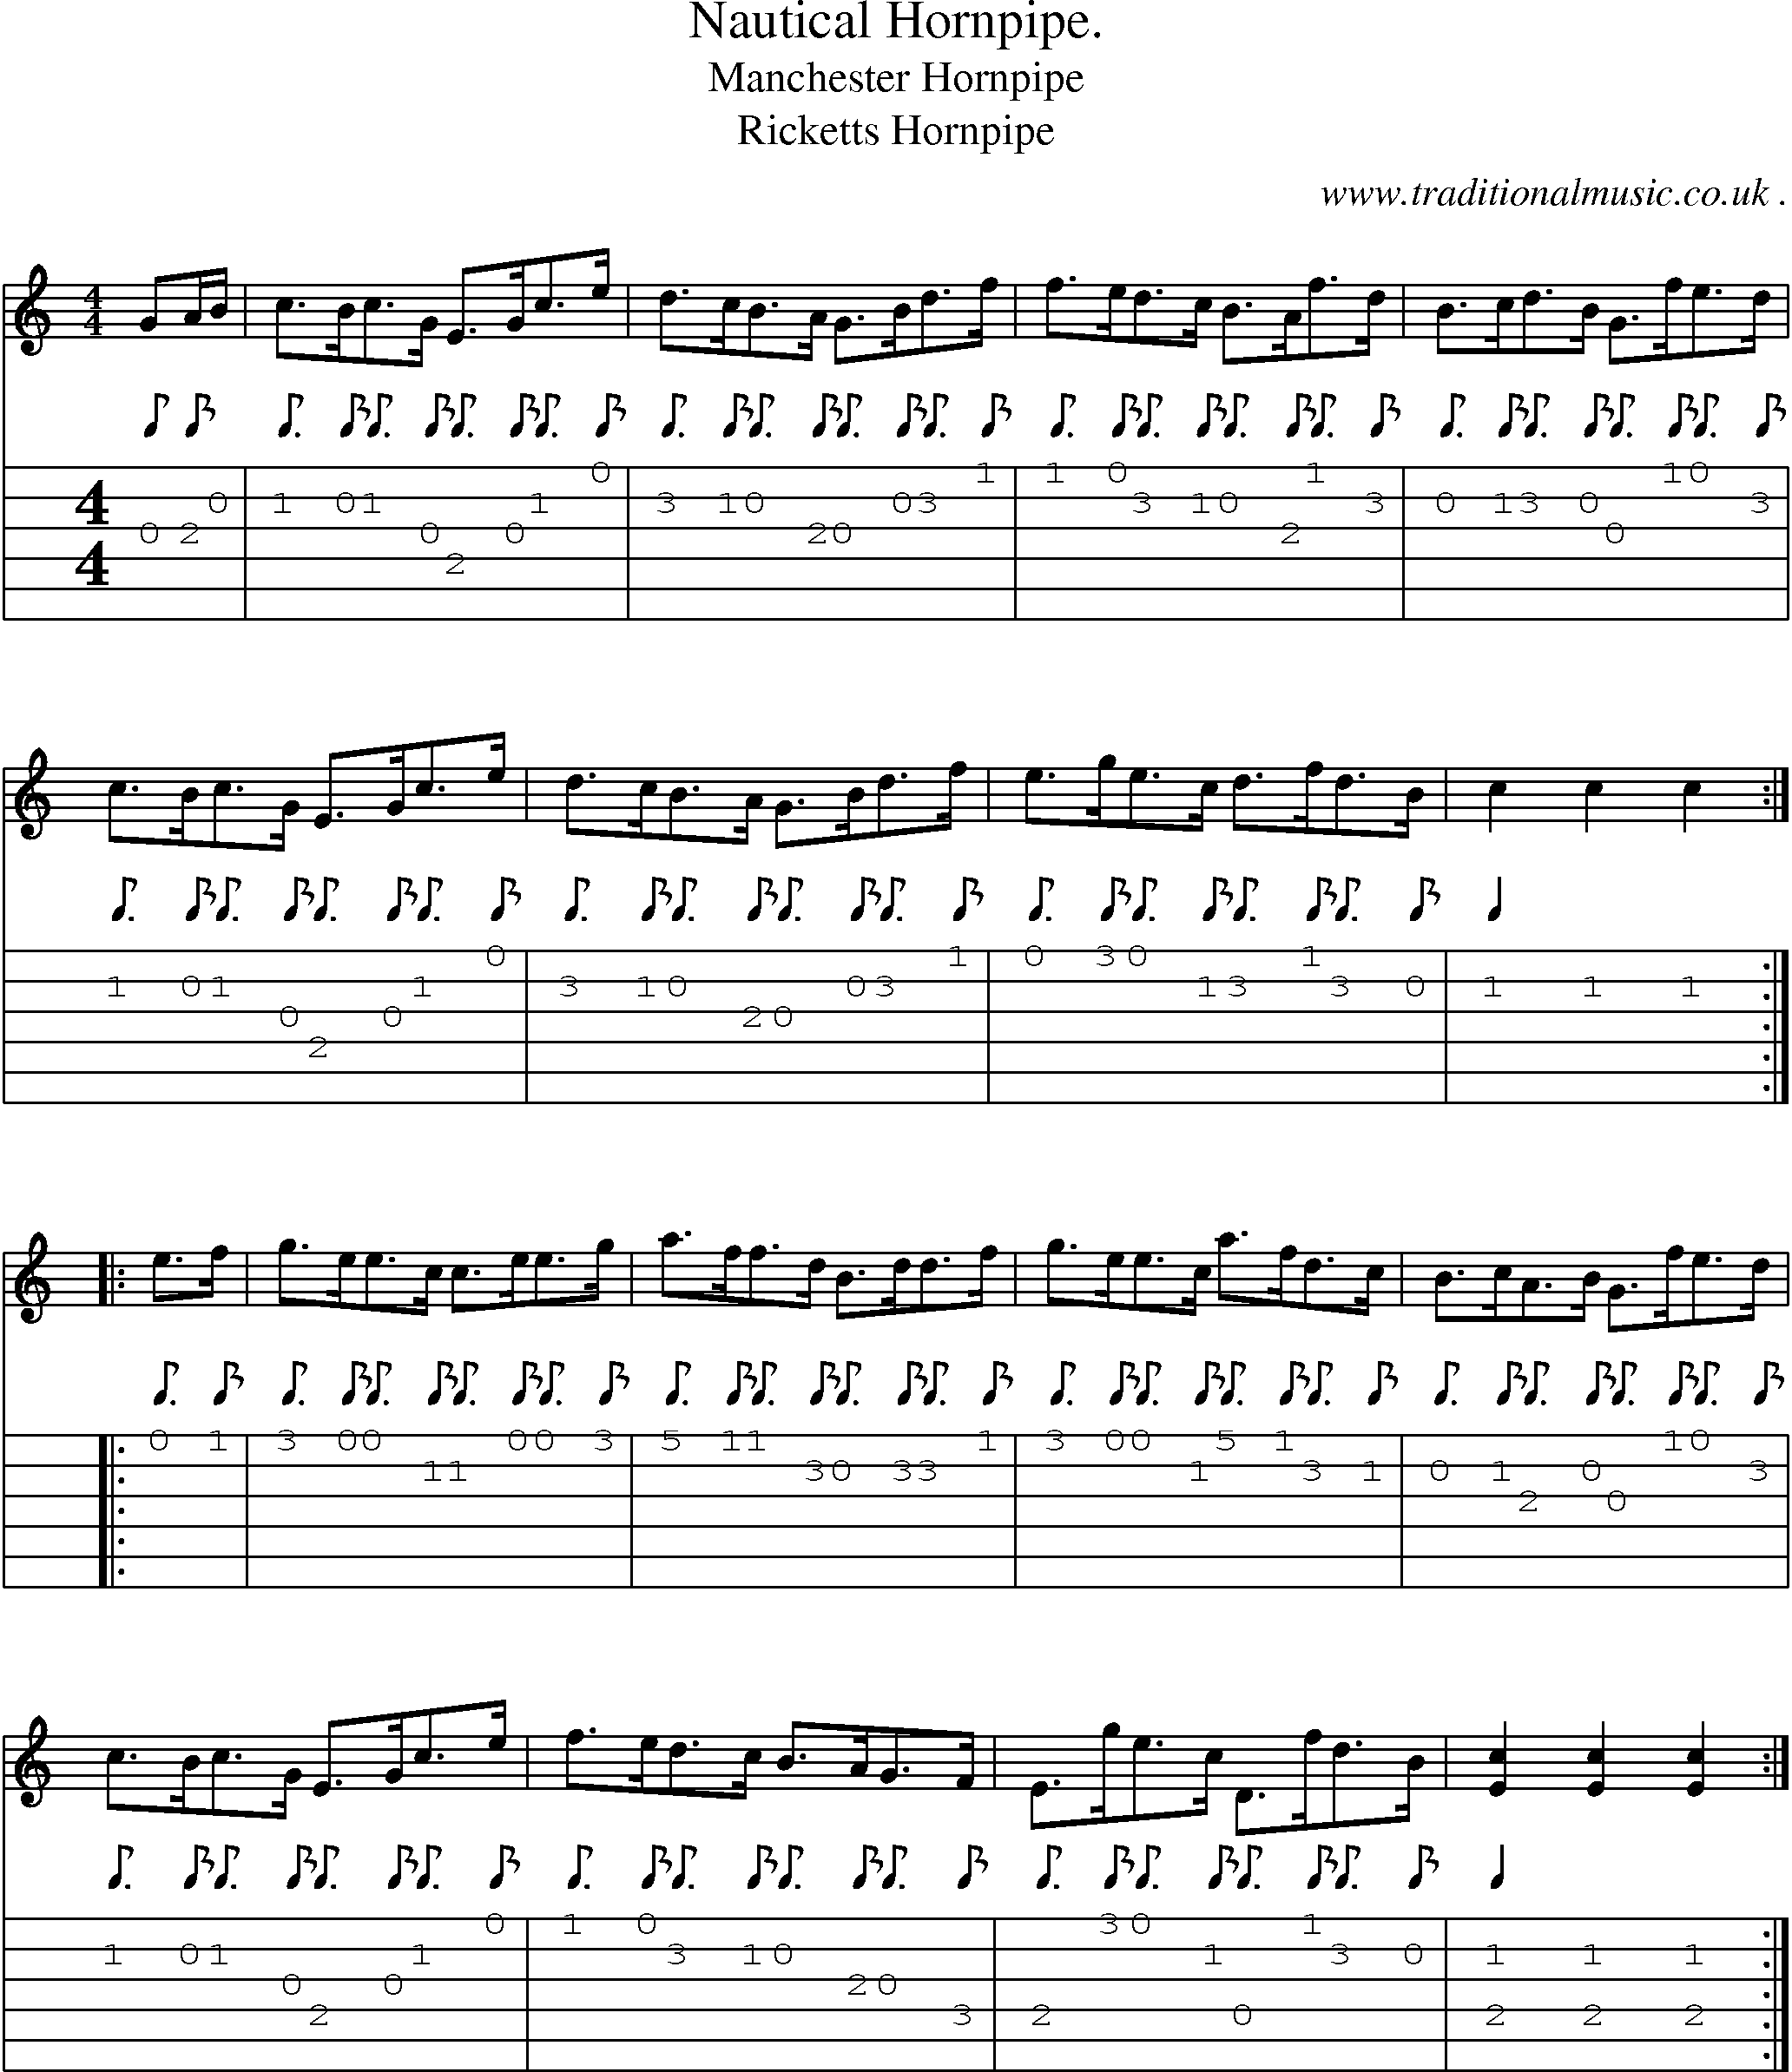 Sheet-Music and Guitar Tabs for Nautical Hornpipe